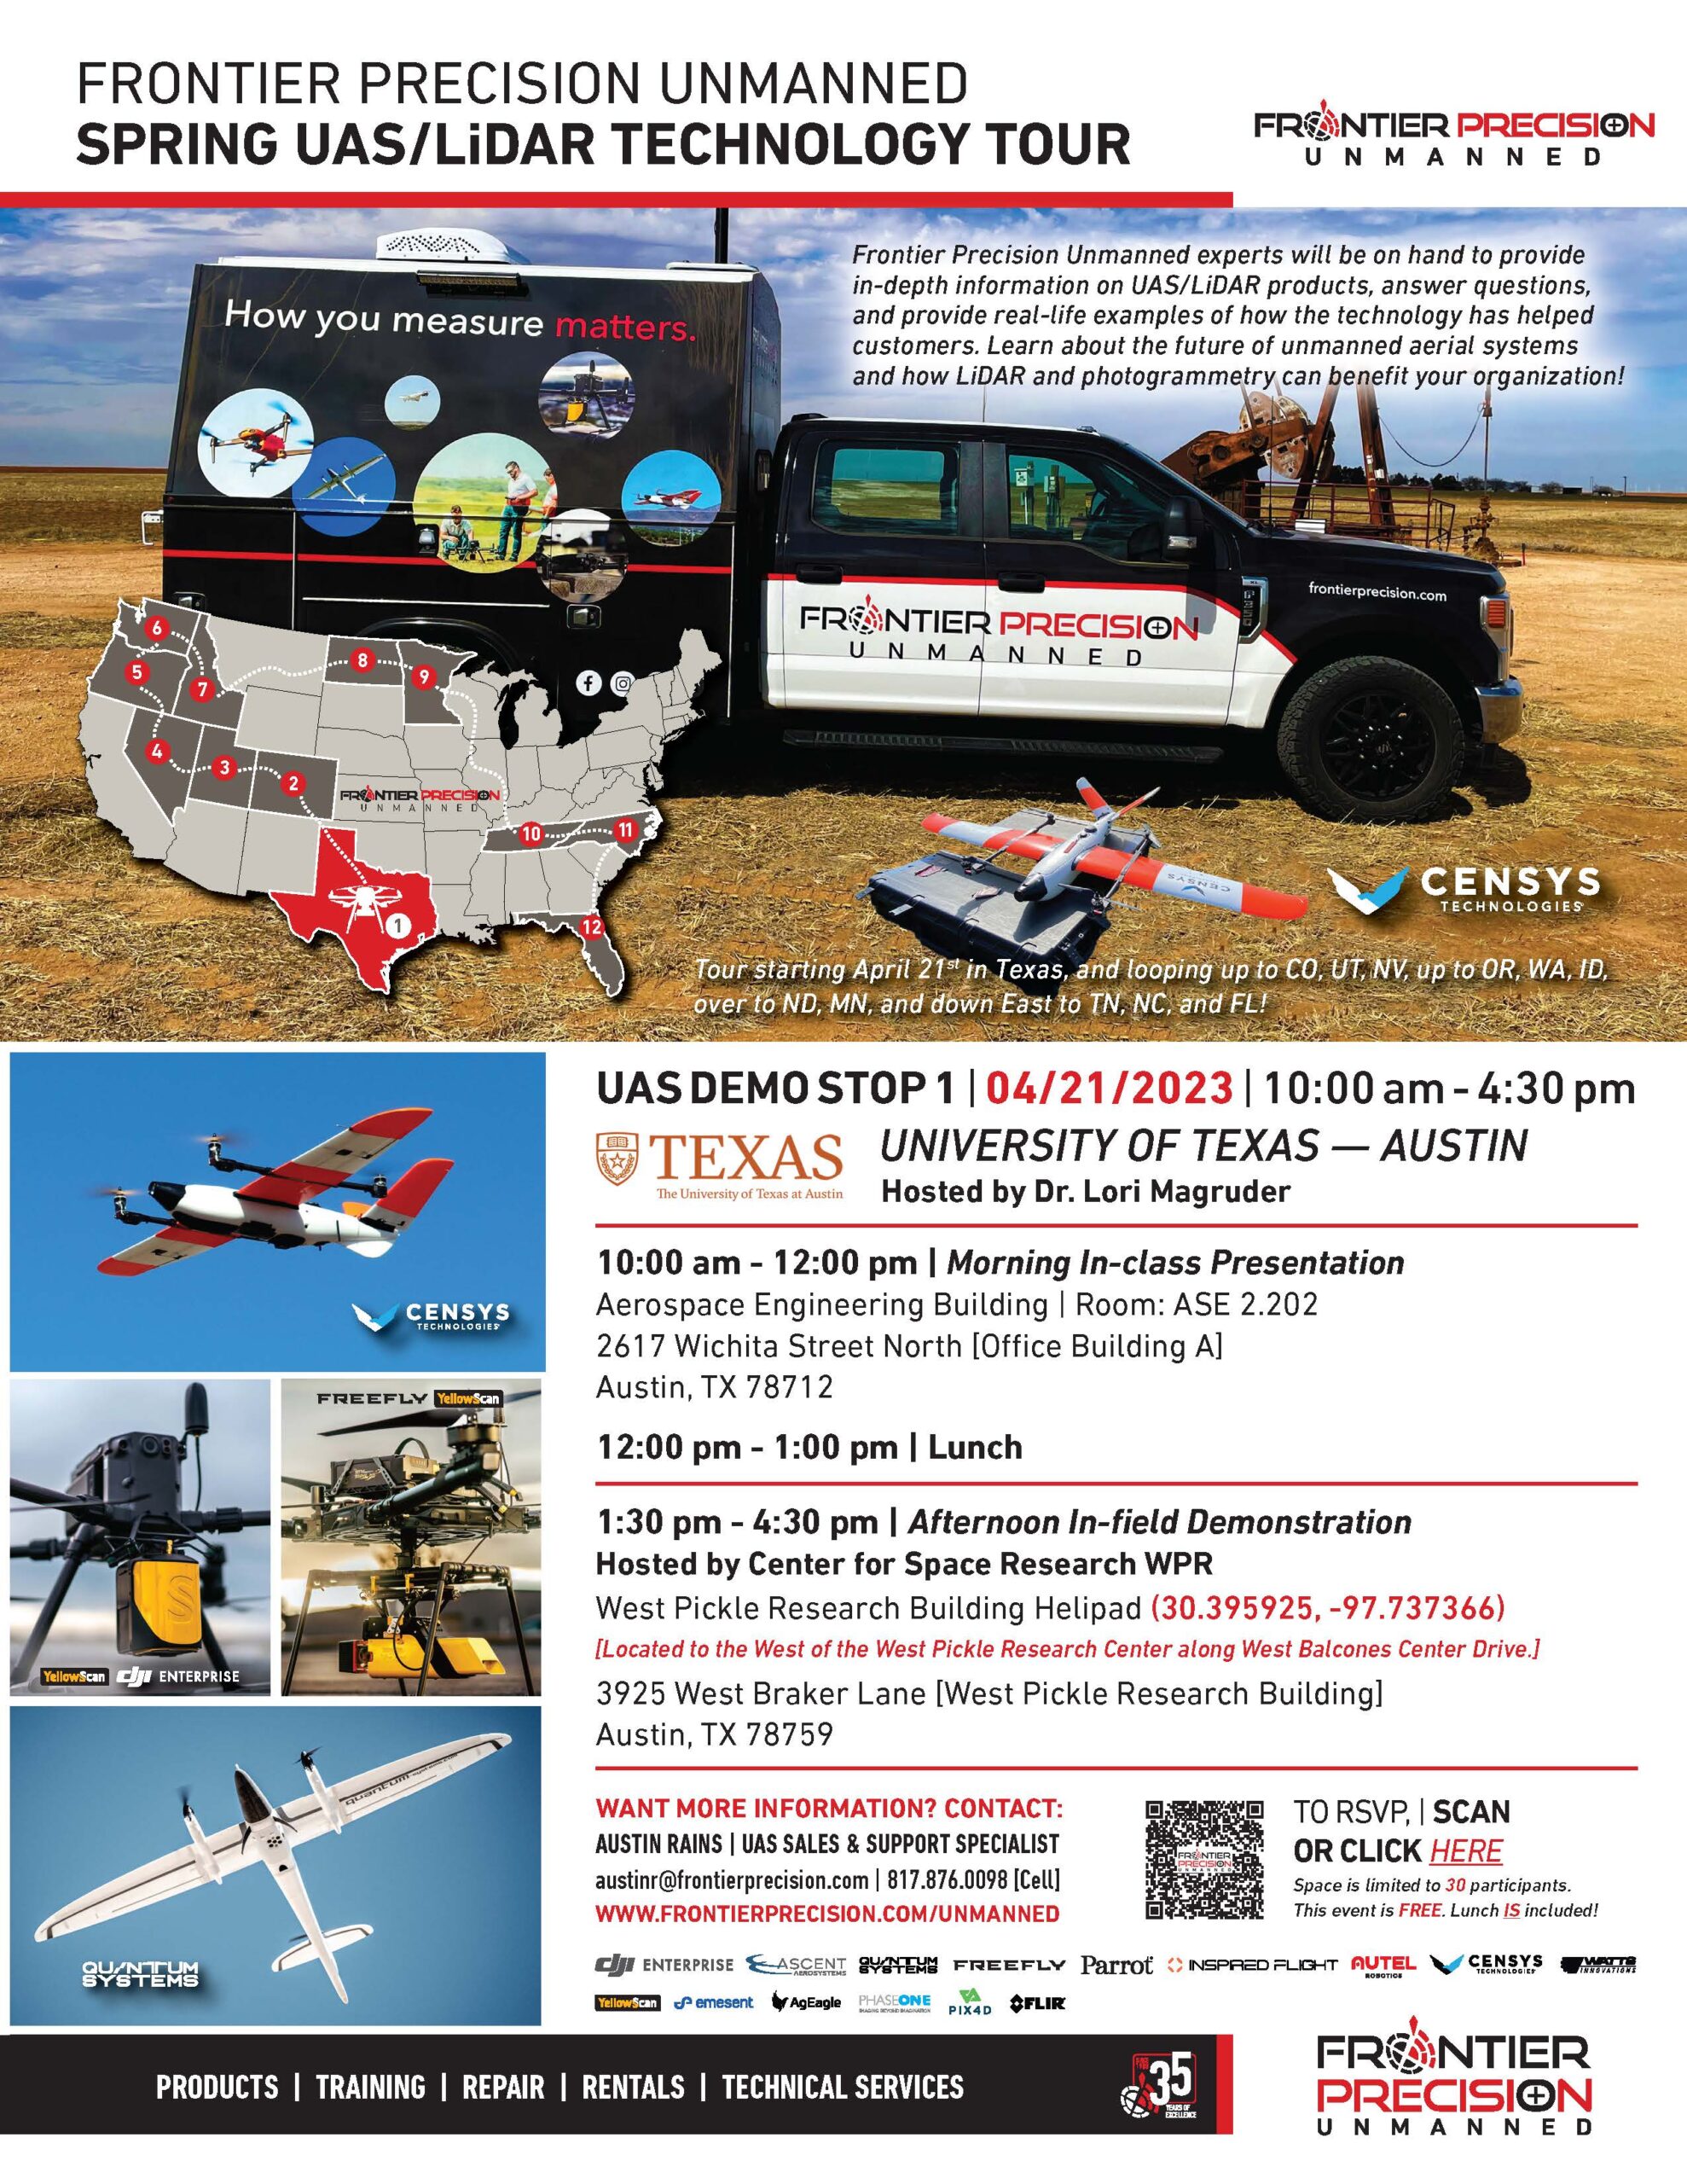 Frontier Precision Unmanned Spring UAS/LiDAR Technology Tour